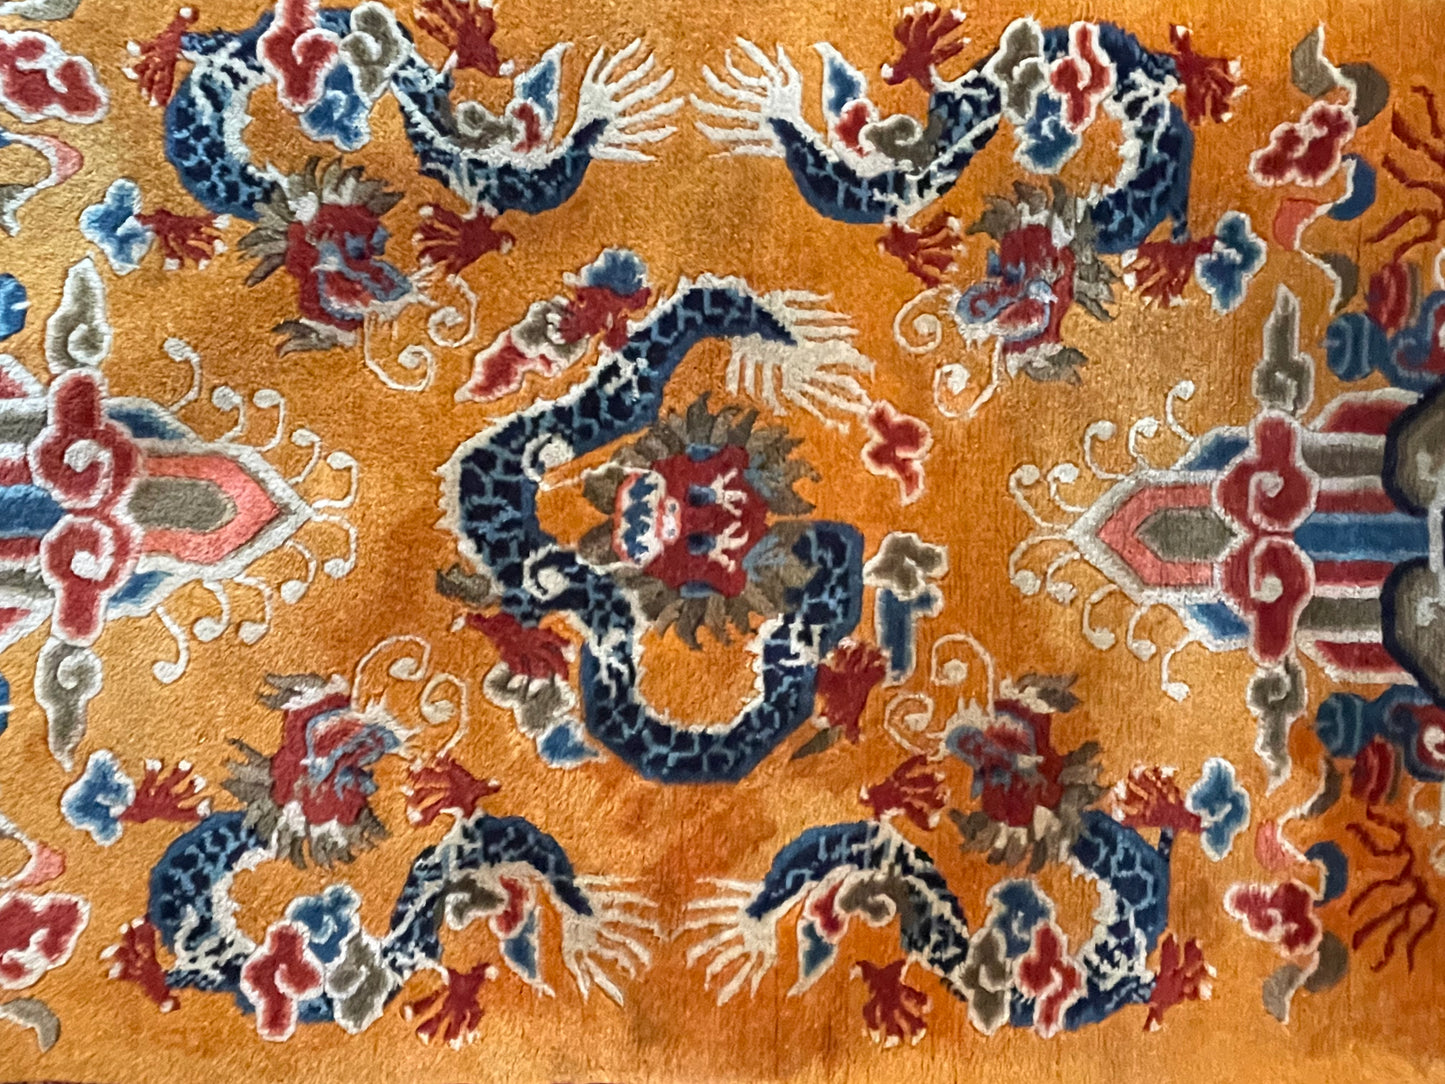 A mid-late 20th C. Dragon rug